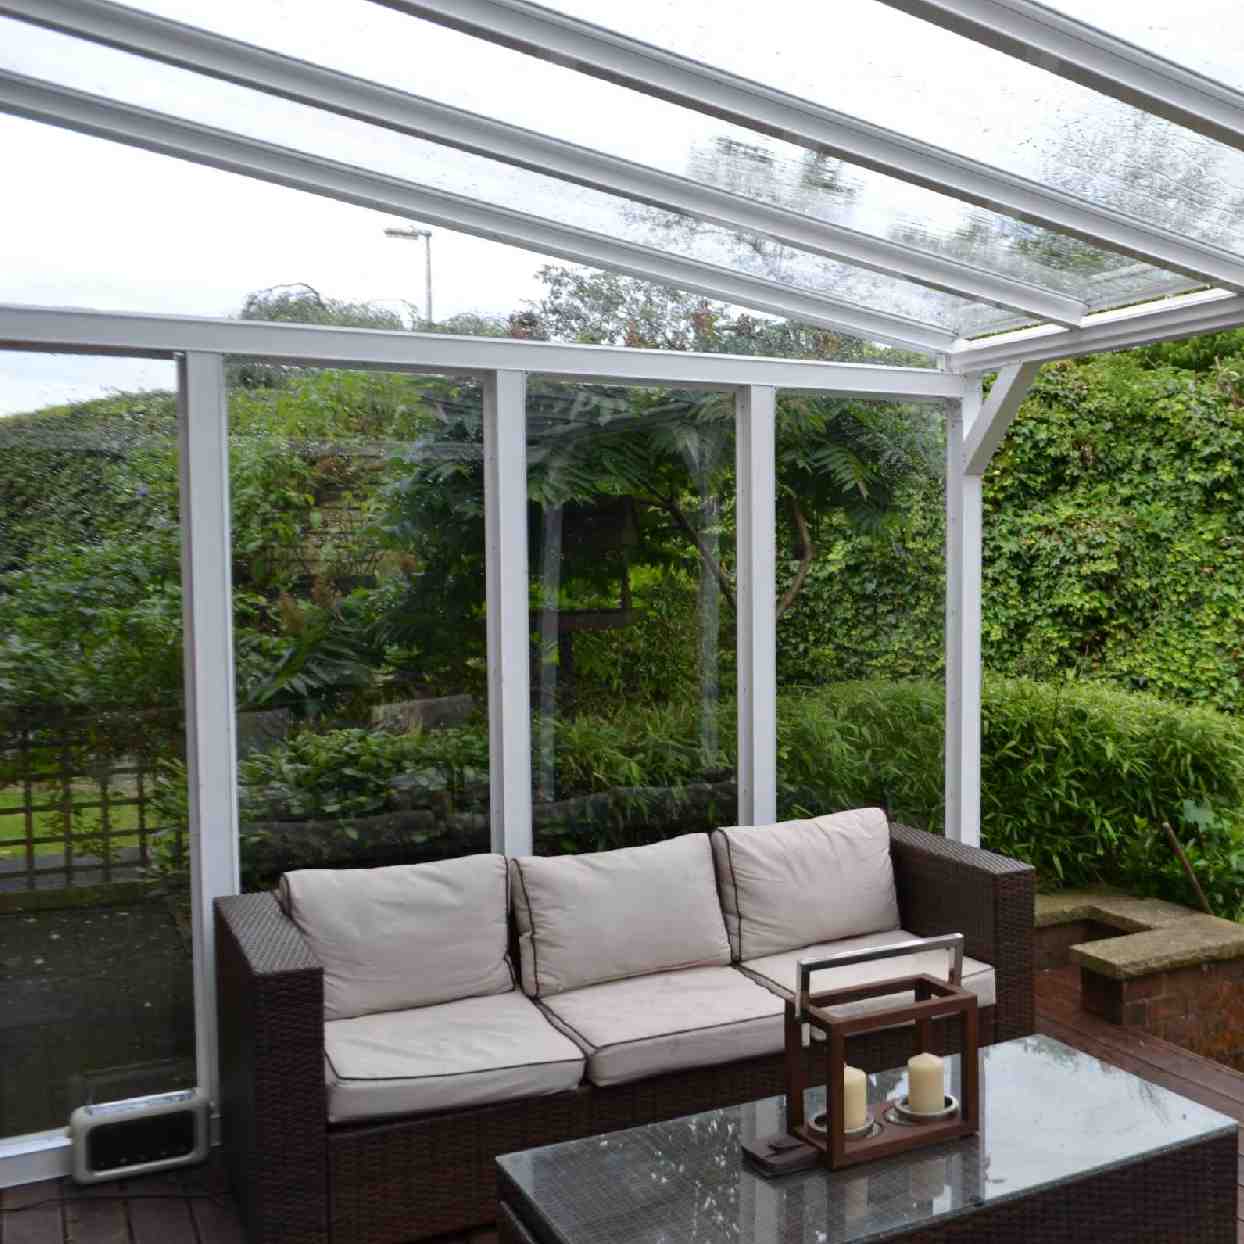 Buy Omega Verandah White with 16mm Polycarbonate Glazing - 5.6m (W) x 3.5m (P), (3) Supporting Posts online today